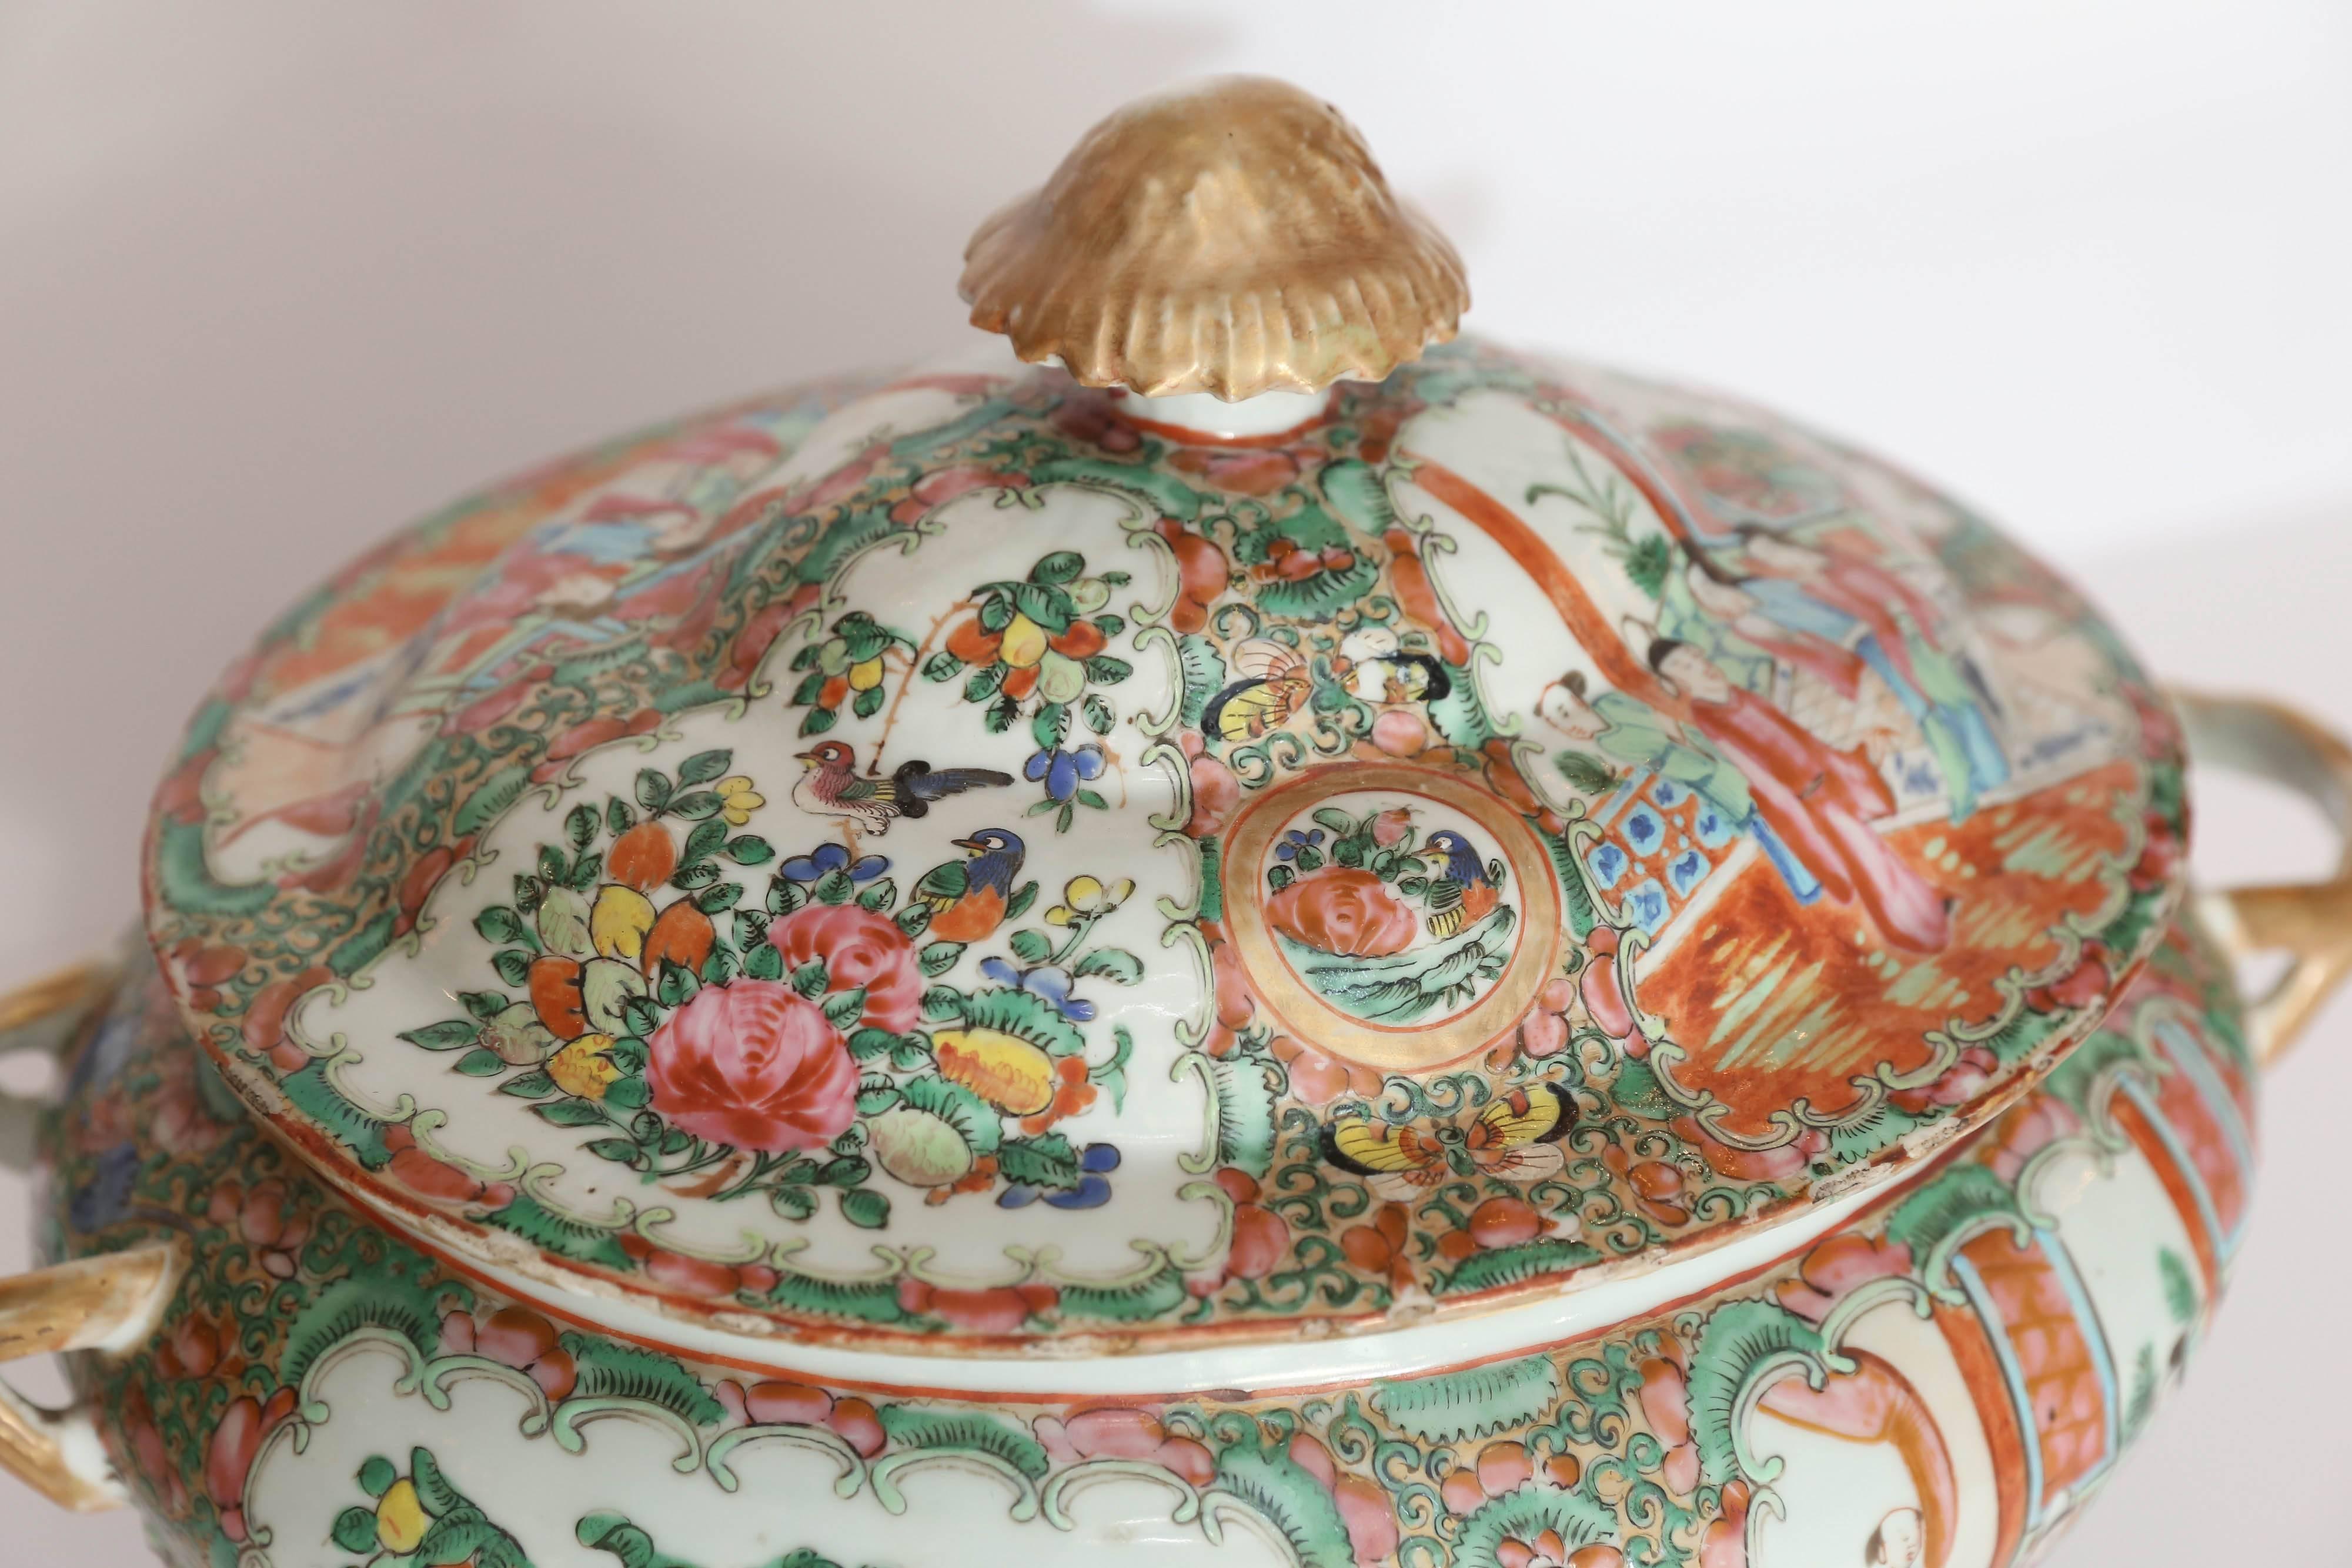 Rose medallion Chinese export tureen
Hand painted with figures and garden scenes
Butterflies, floral and birds